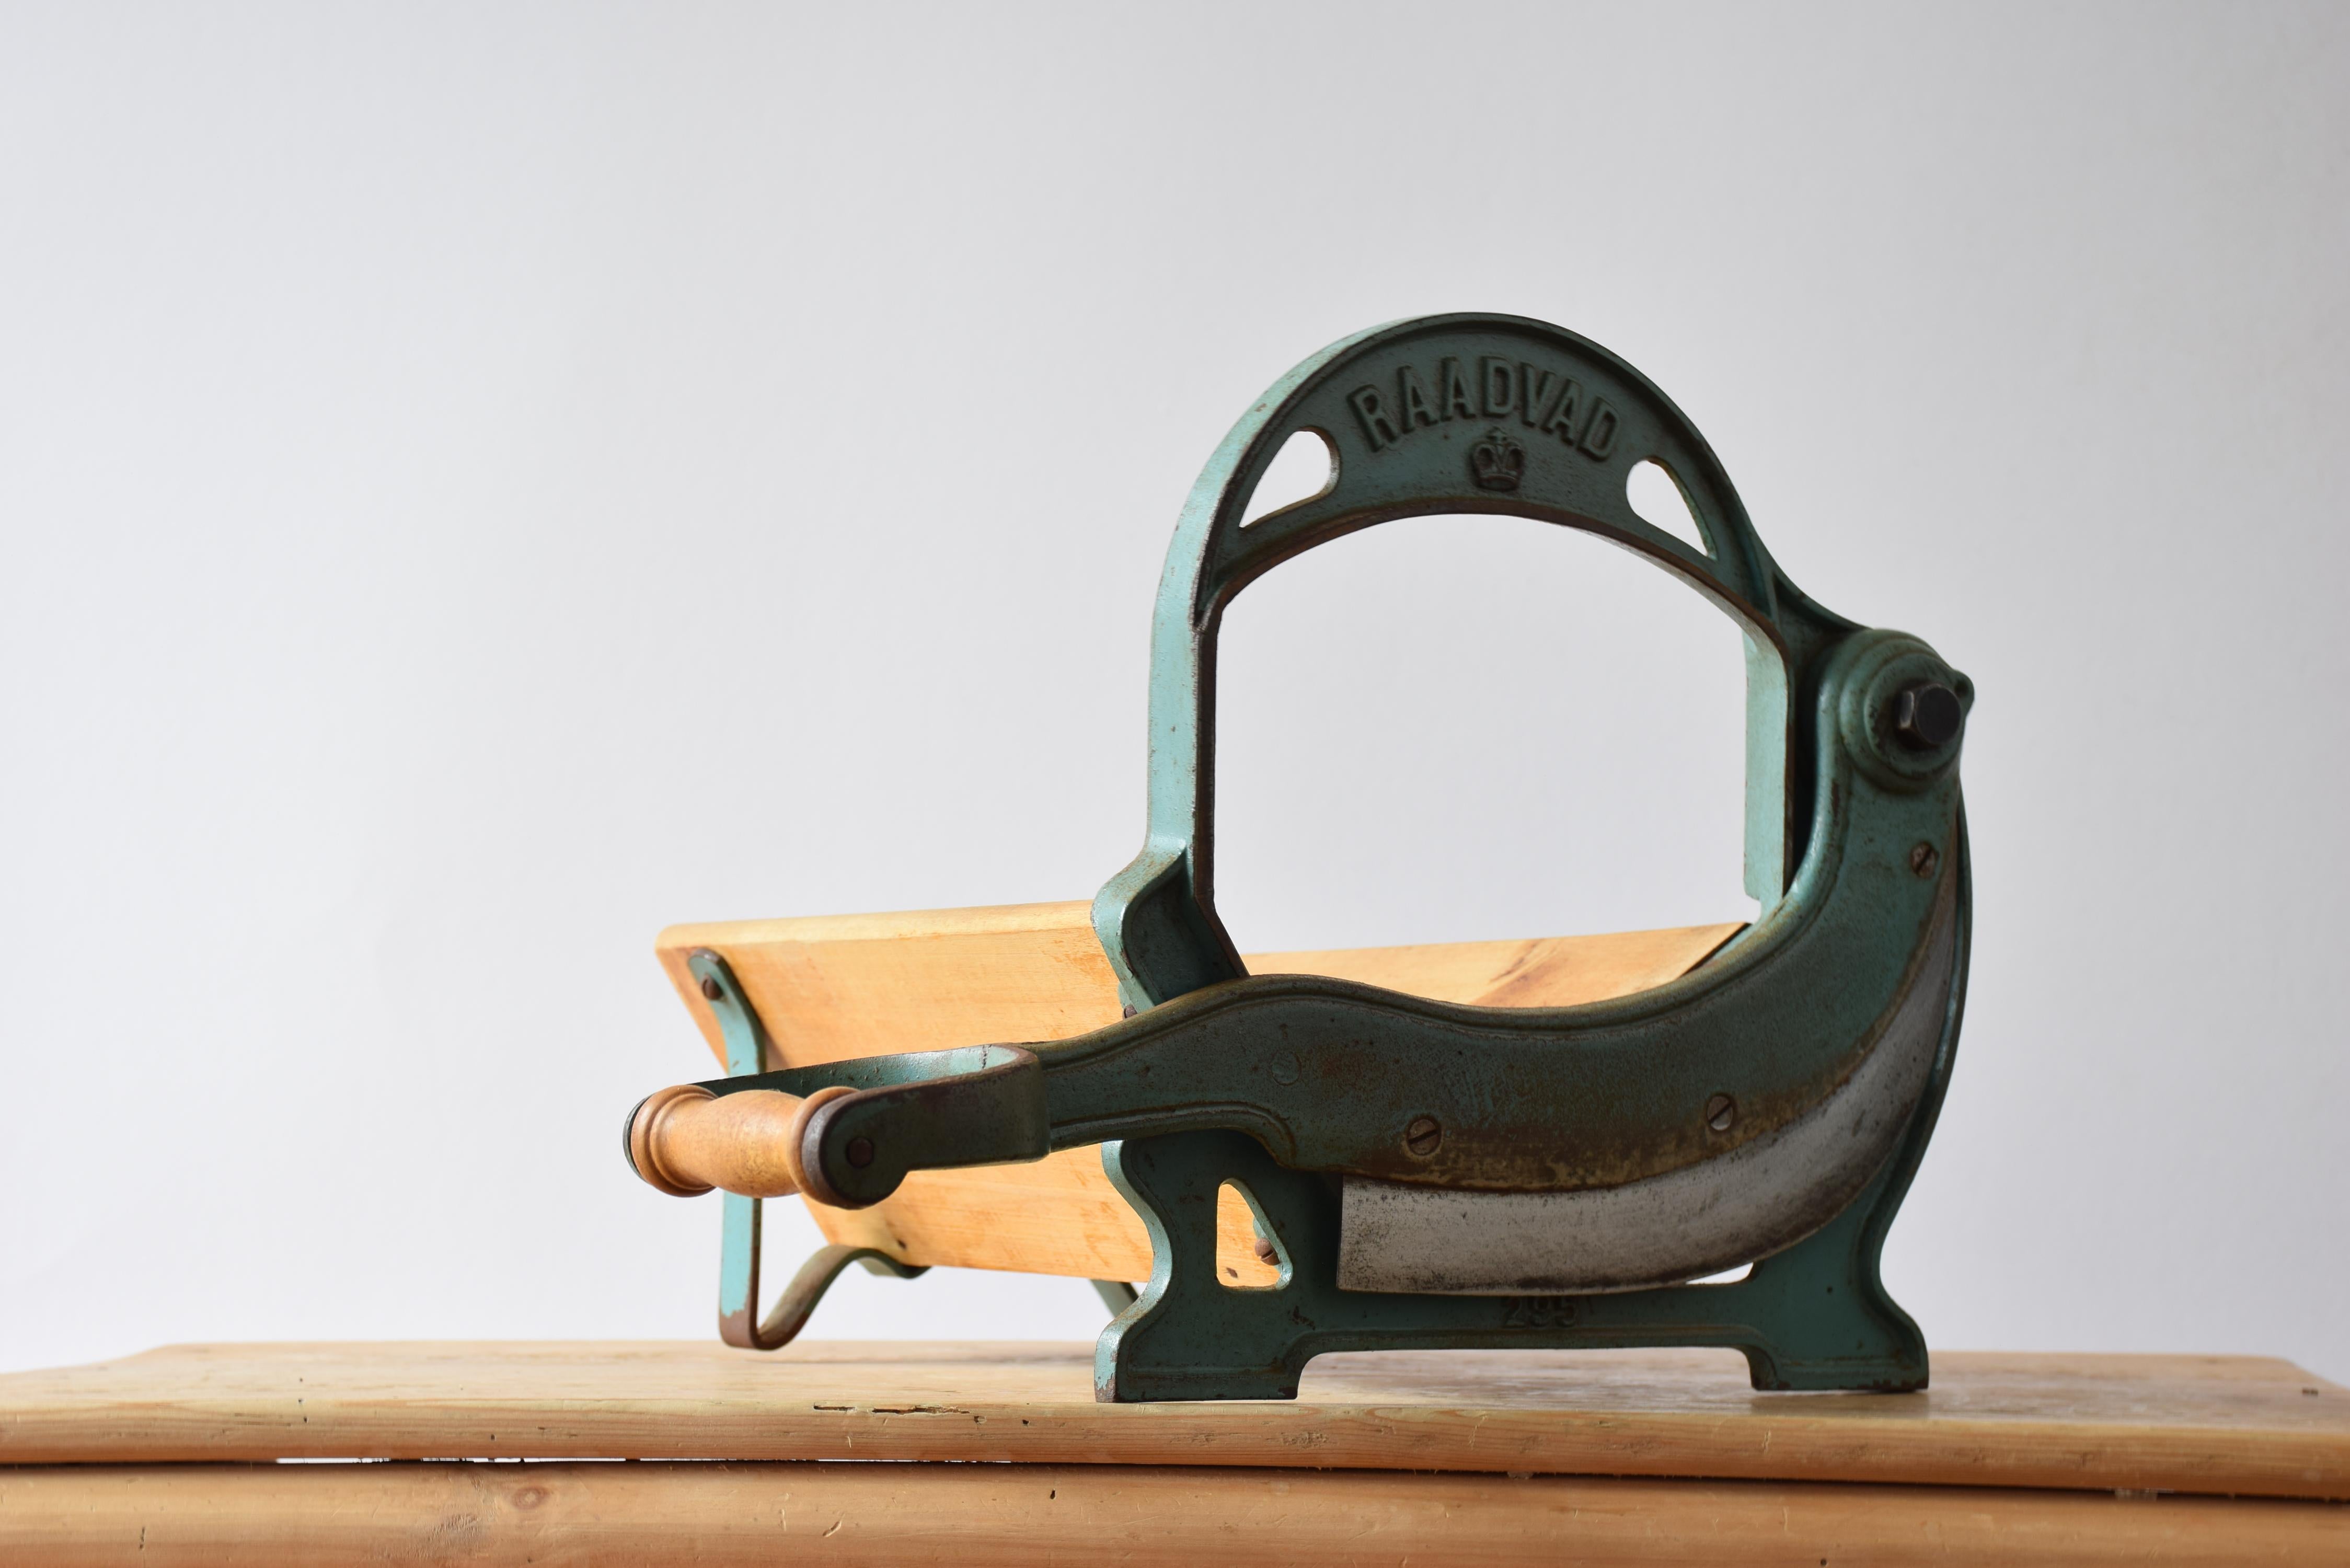 Original vintage Danish almost antique Raadvad bread slicer in Art Nouveau style.
The dusted blue lacquer has a great patina.

Manufctured in Denmark circa 1920s-1930s.

The bread slicer works perfectly for cutting firm bread but also firm